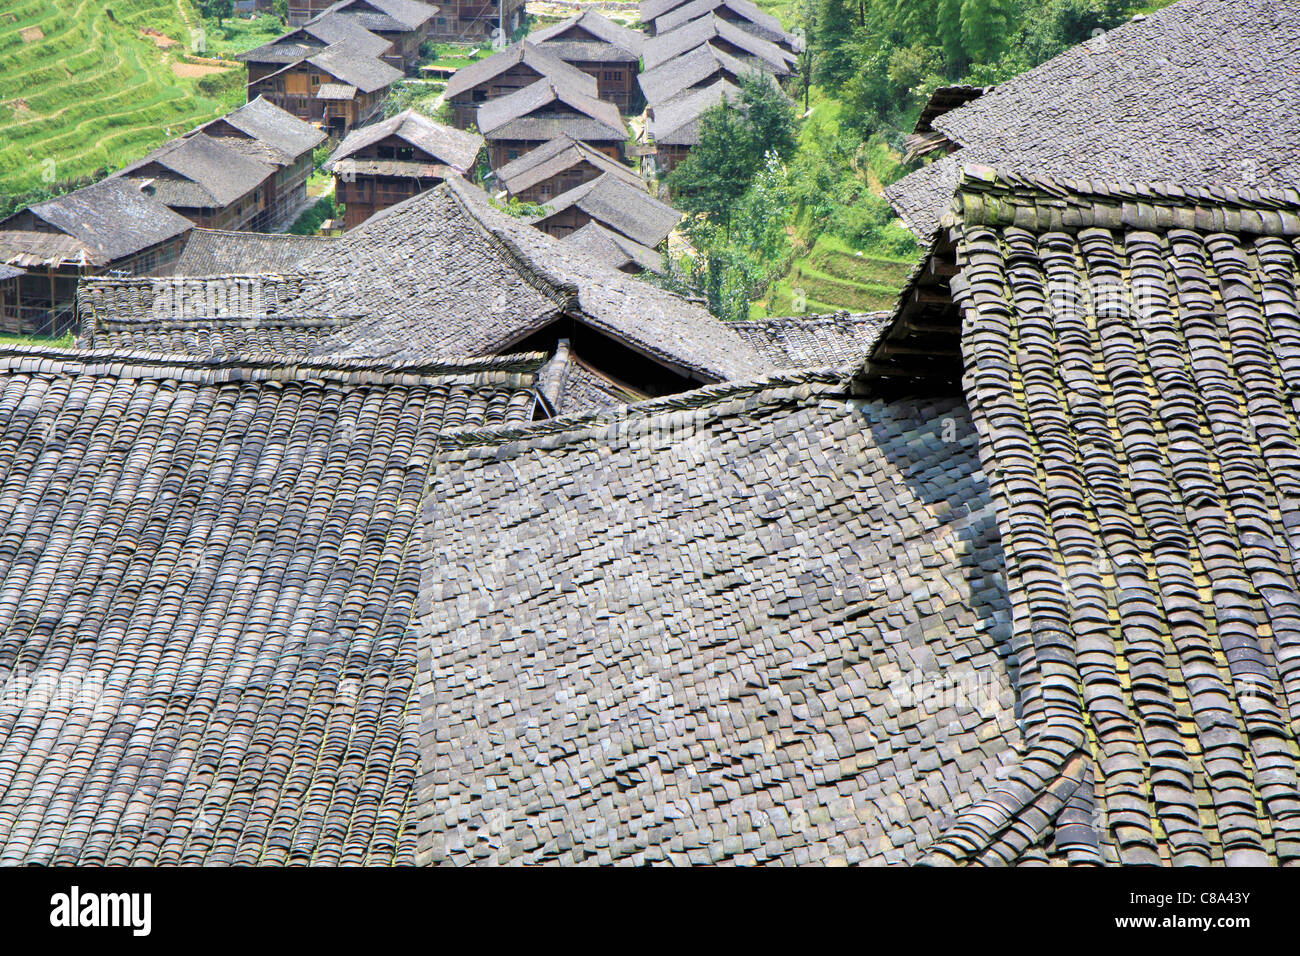 Roofs and houses in the terraced rice fields area, Ping'an, Guanxi, China Stock Photo